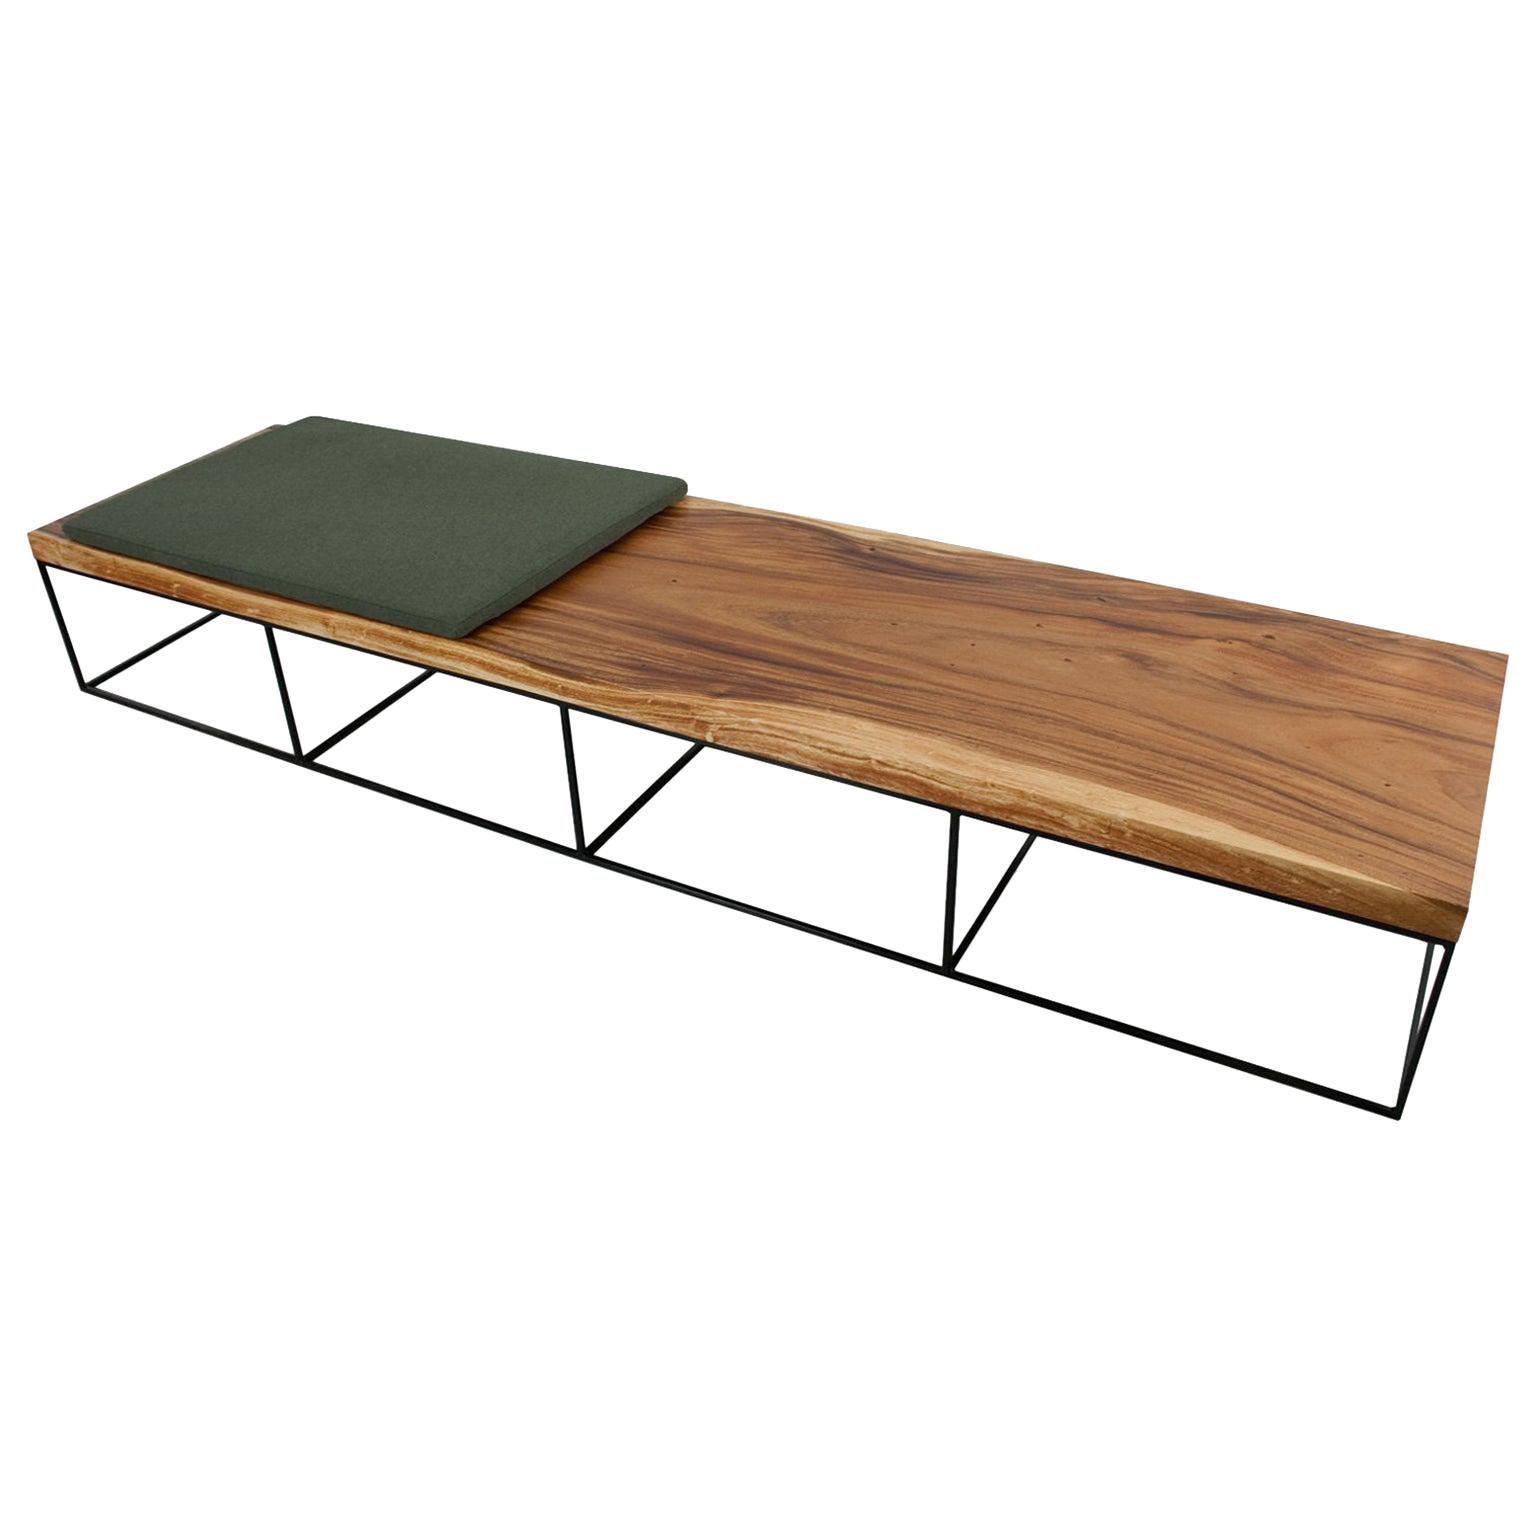 Long Wooden Suar Coffee Table or Bench, Organic Contemporary Modern Design For Sale